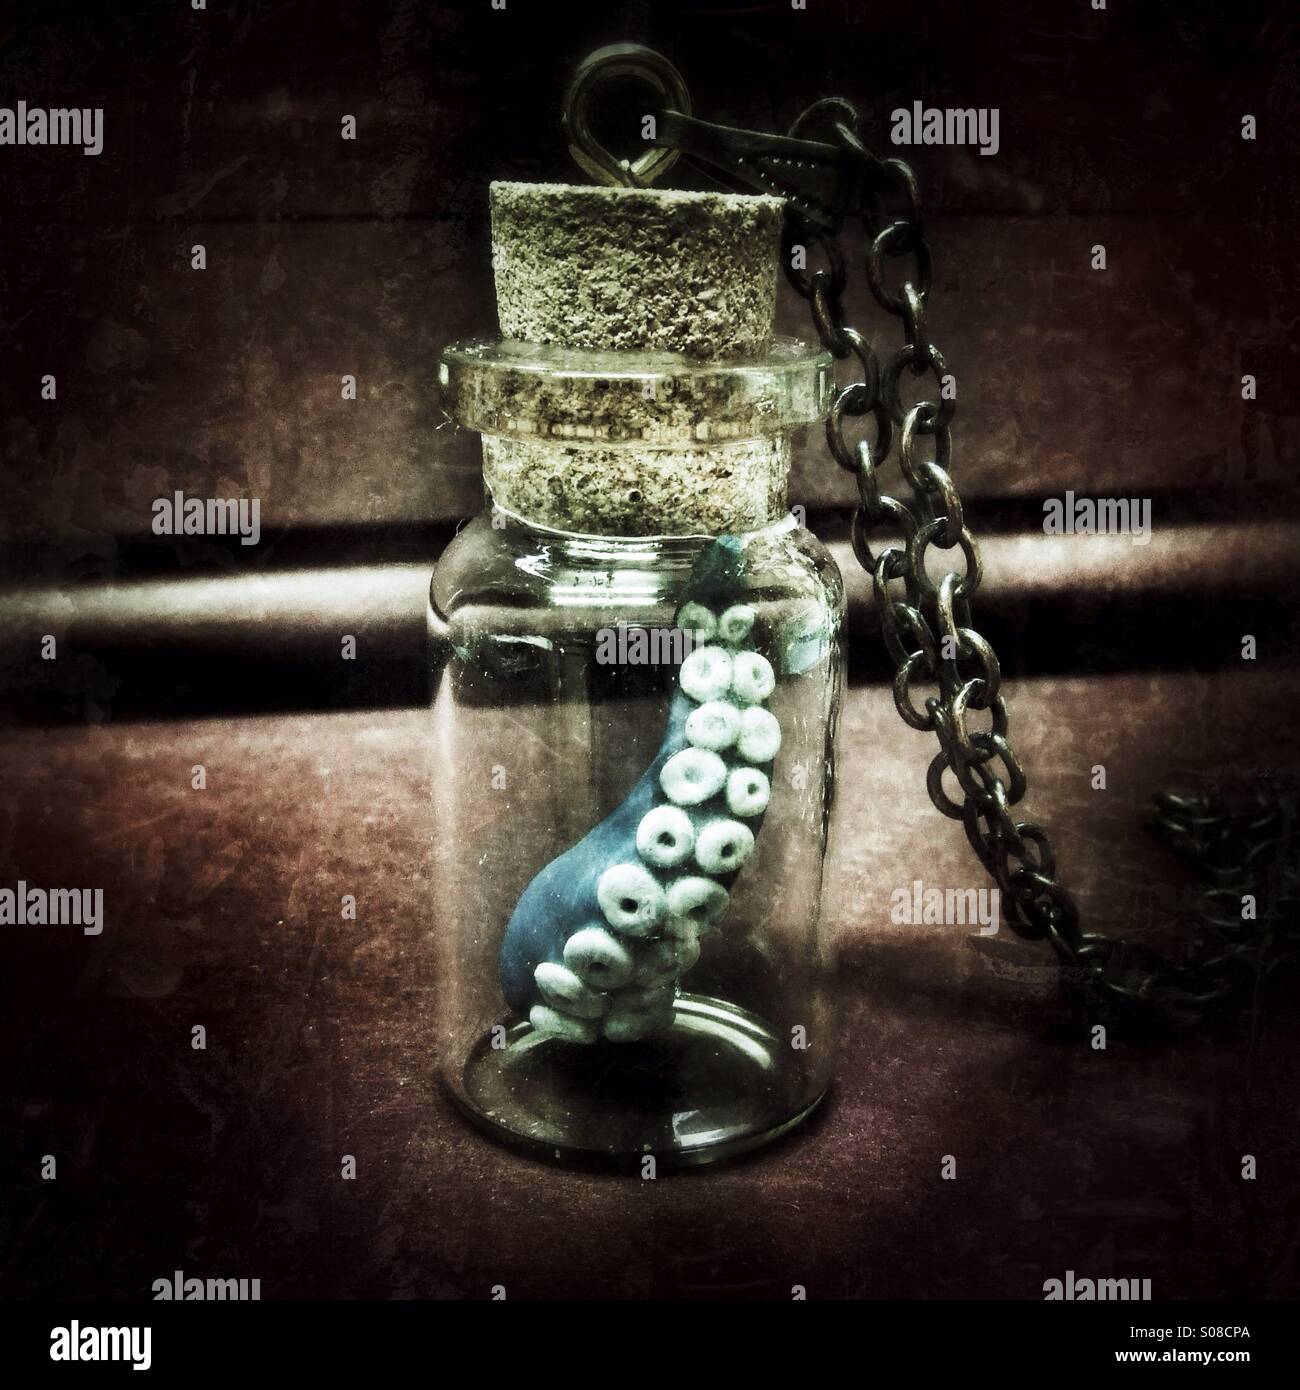 Tentacle in a bottle steampunk curio Stock Photo